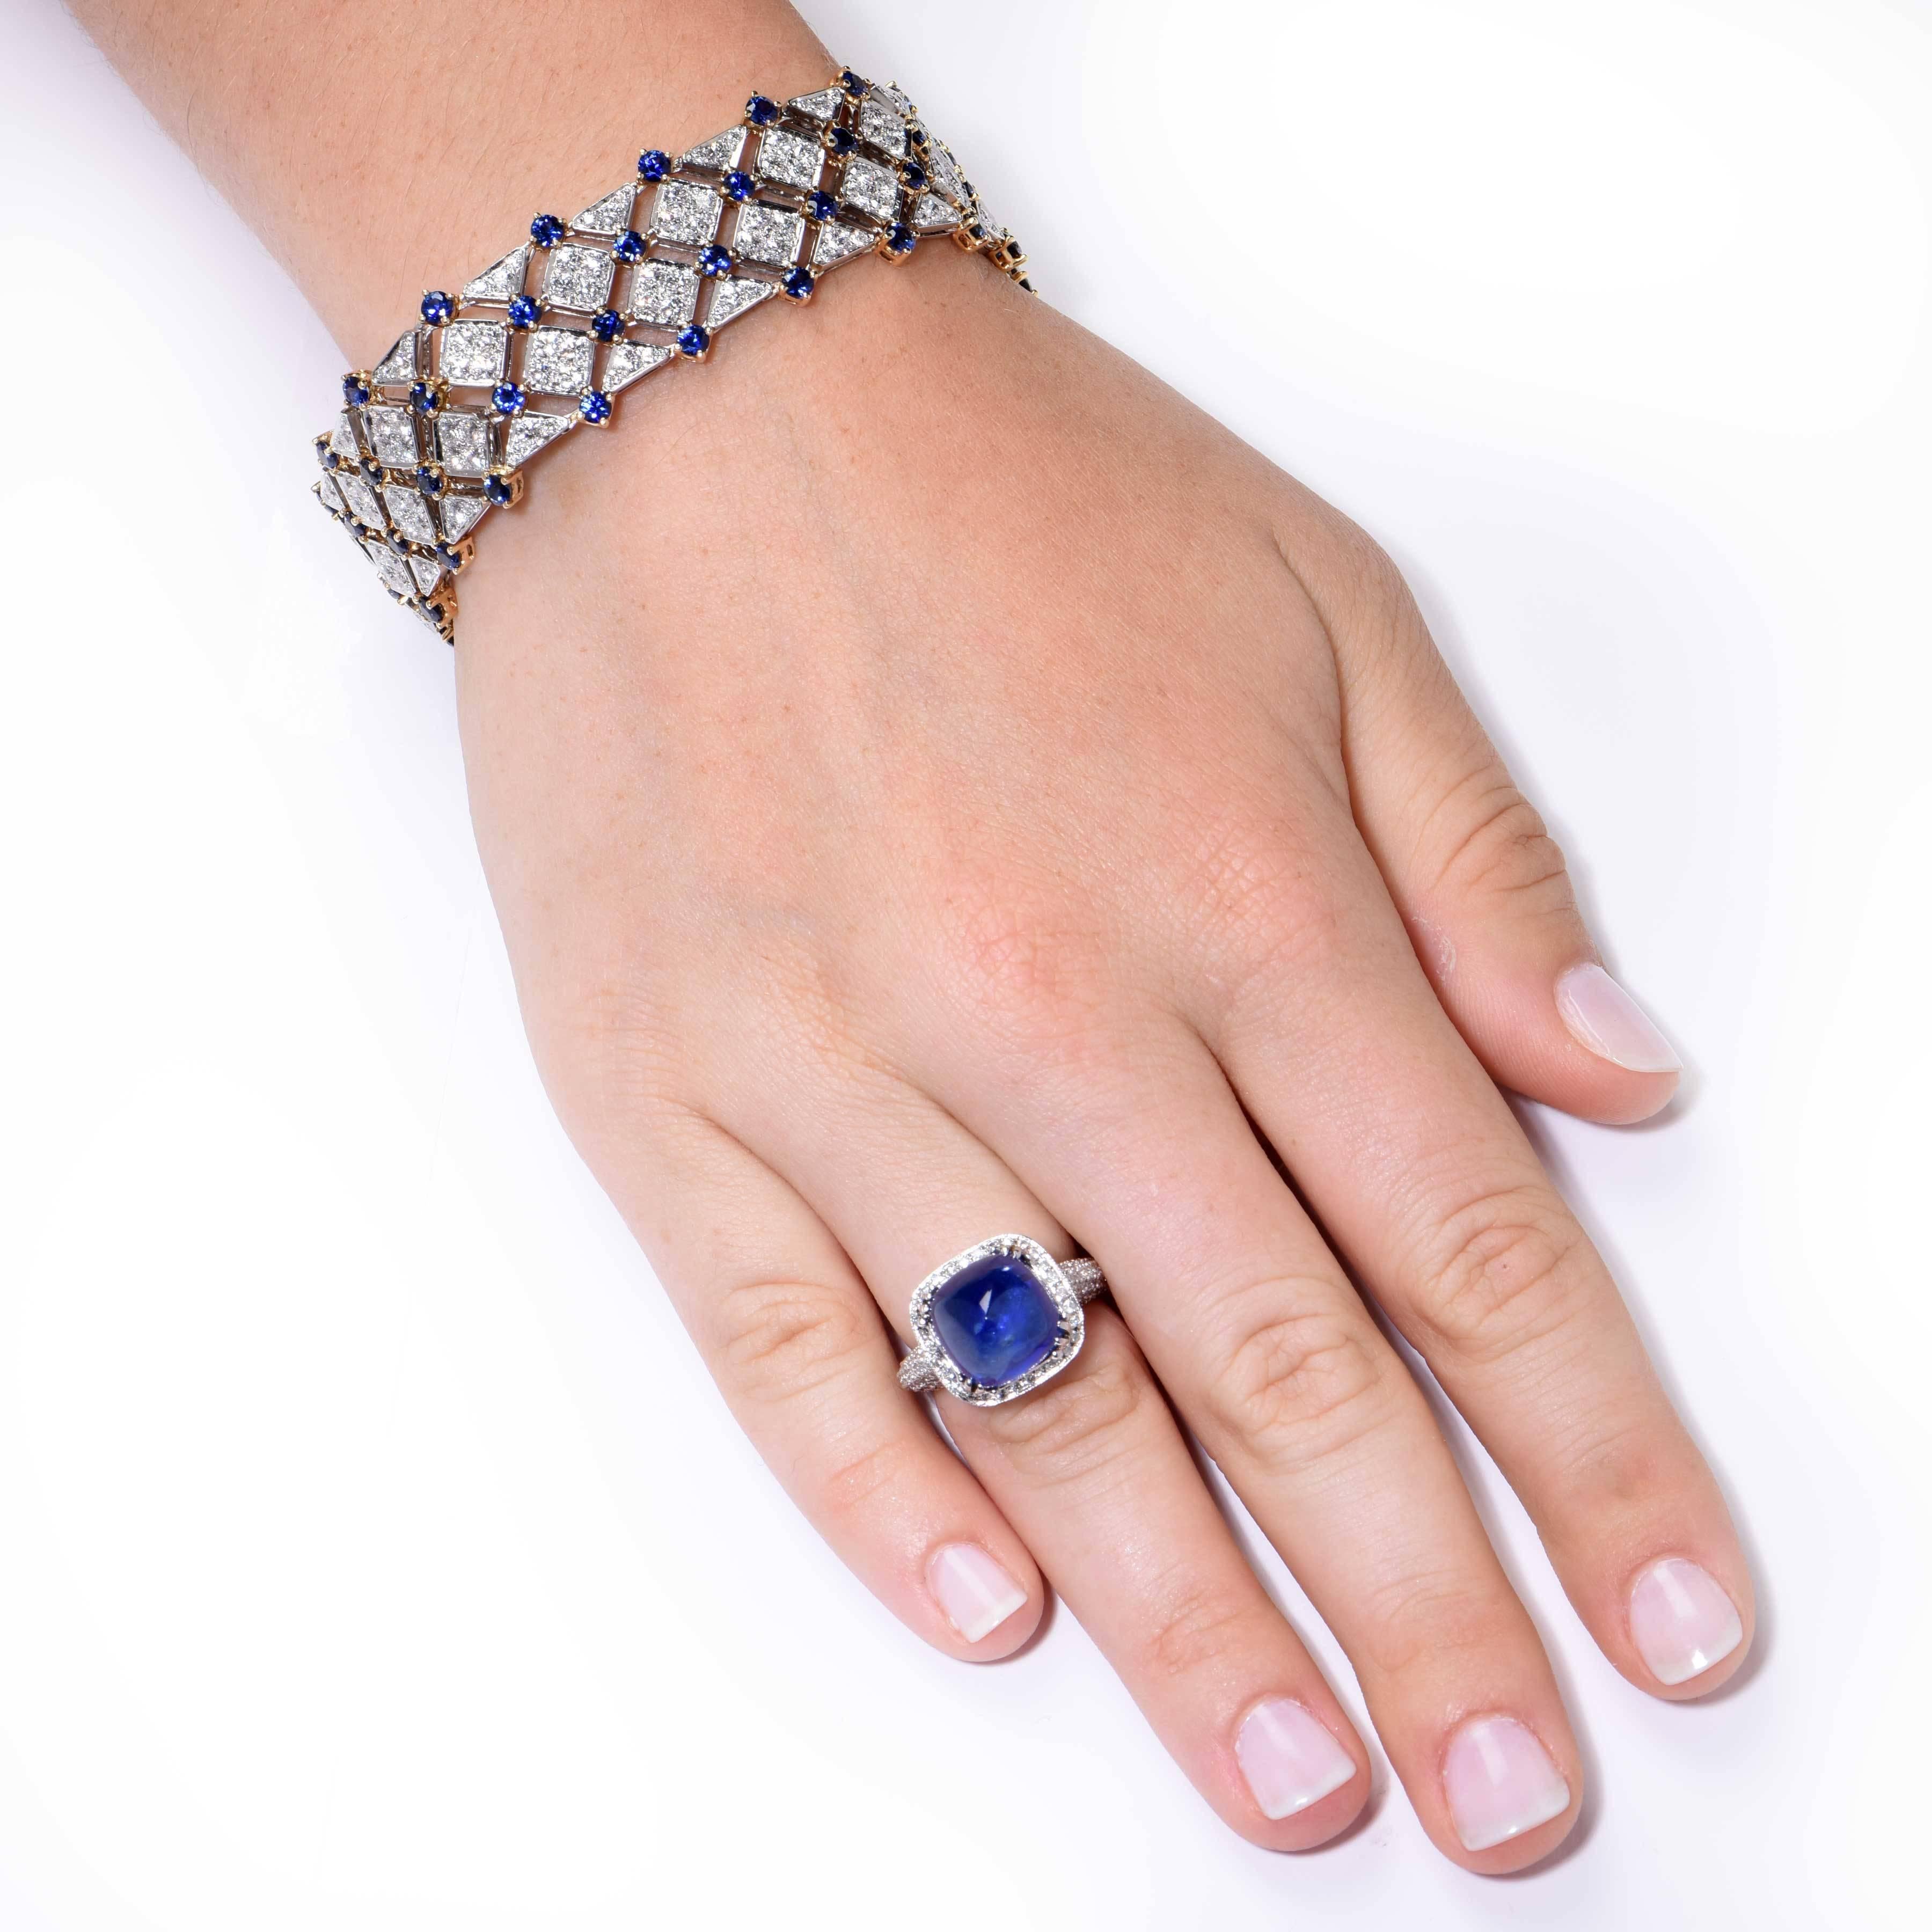 This stunning ring features a natural 10.48 Cts. Sugarloaf Sapphire adorned  by round diamonds weighing 1.72 Cts, set in 18 Kt white gold.

Size 6 1/4. Can be sized
Metal Type: 18 Kt White Gold (tested and/or stamped)
Metal Weight: 8.6 Grams